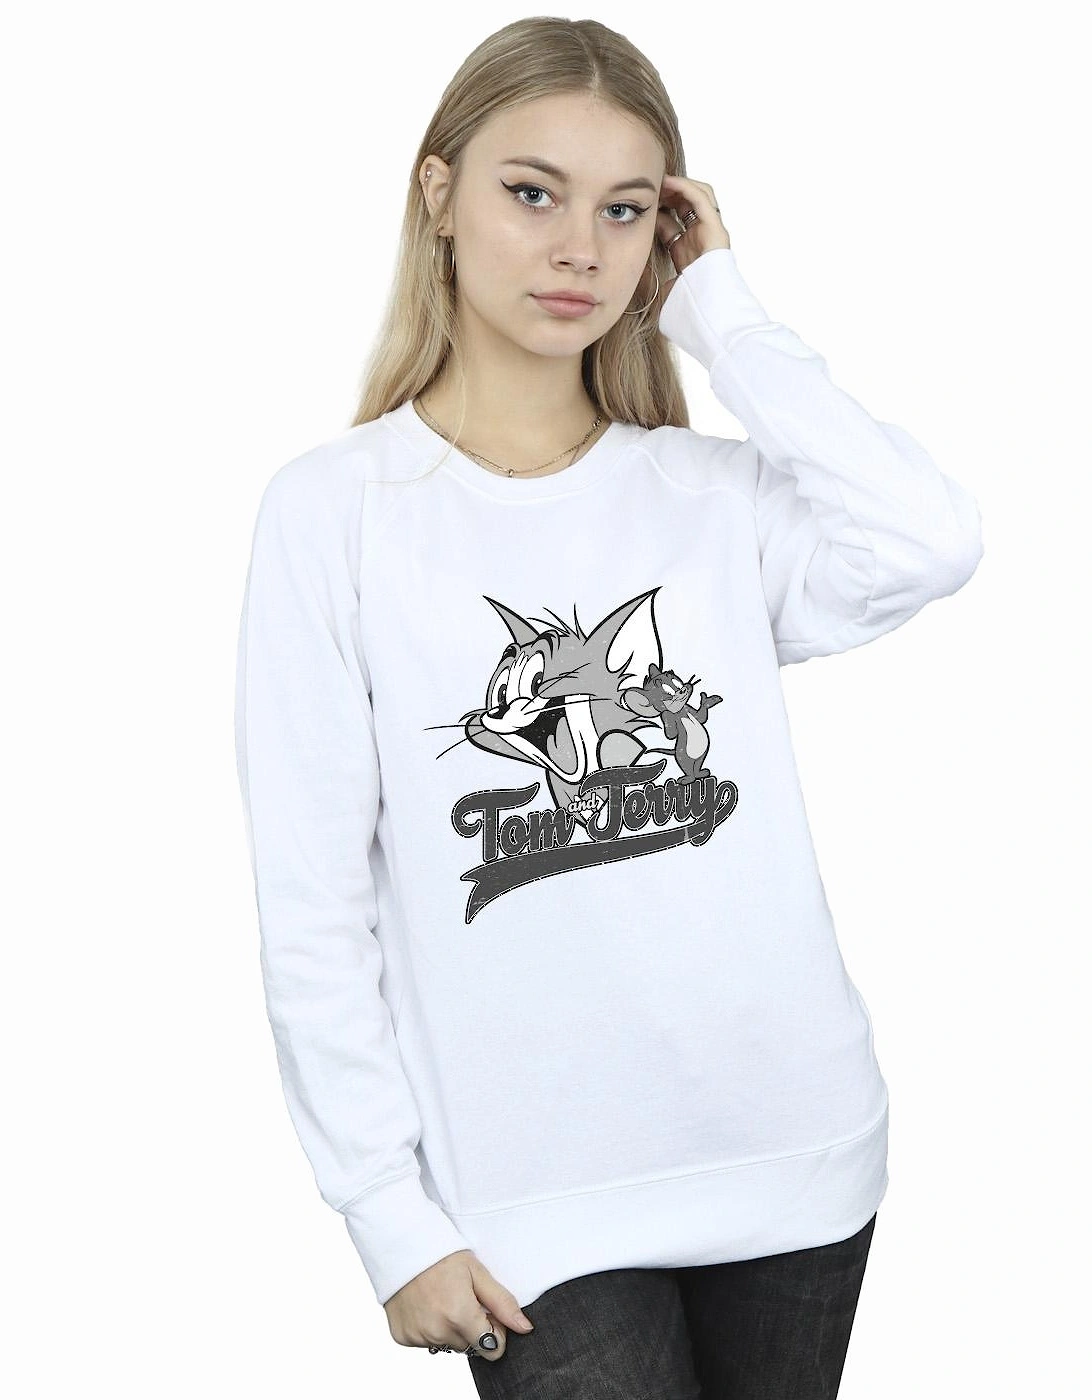 Tom And Jerry Womens/Ladies Greyscale Square Sweatshirt